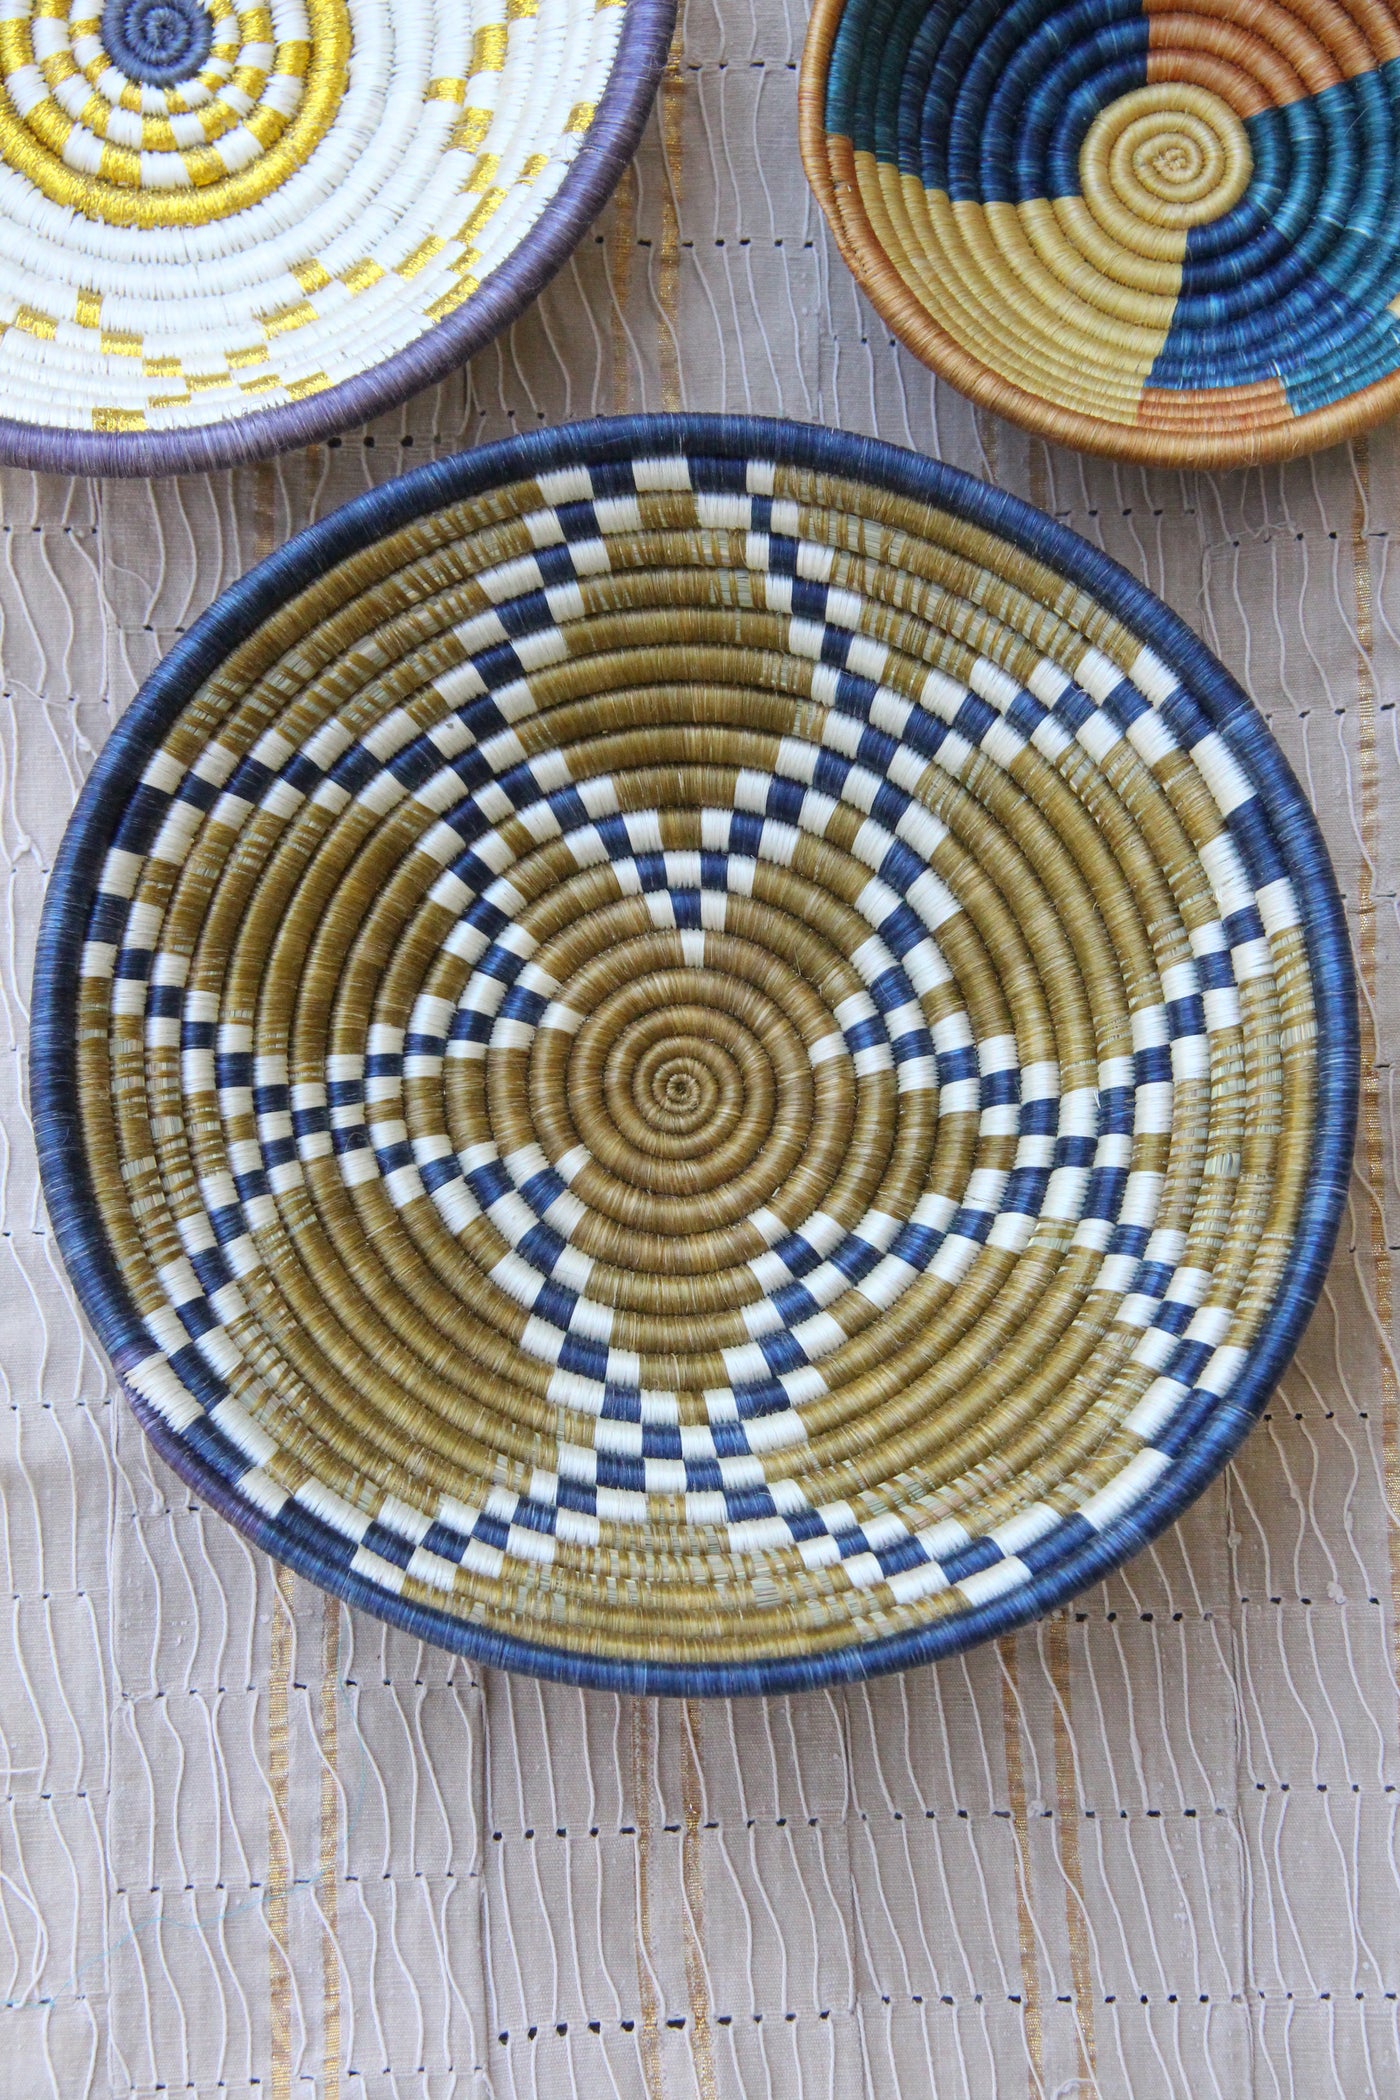 Lillian African Basket Collection, Blue, Tan, Gold, from Rwanda, Set of 3